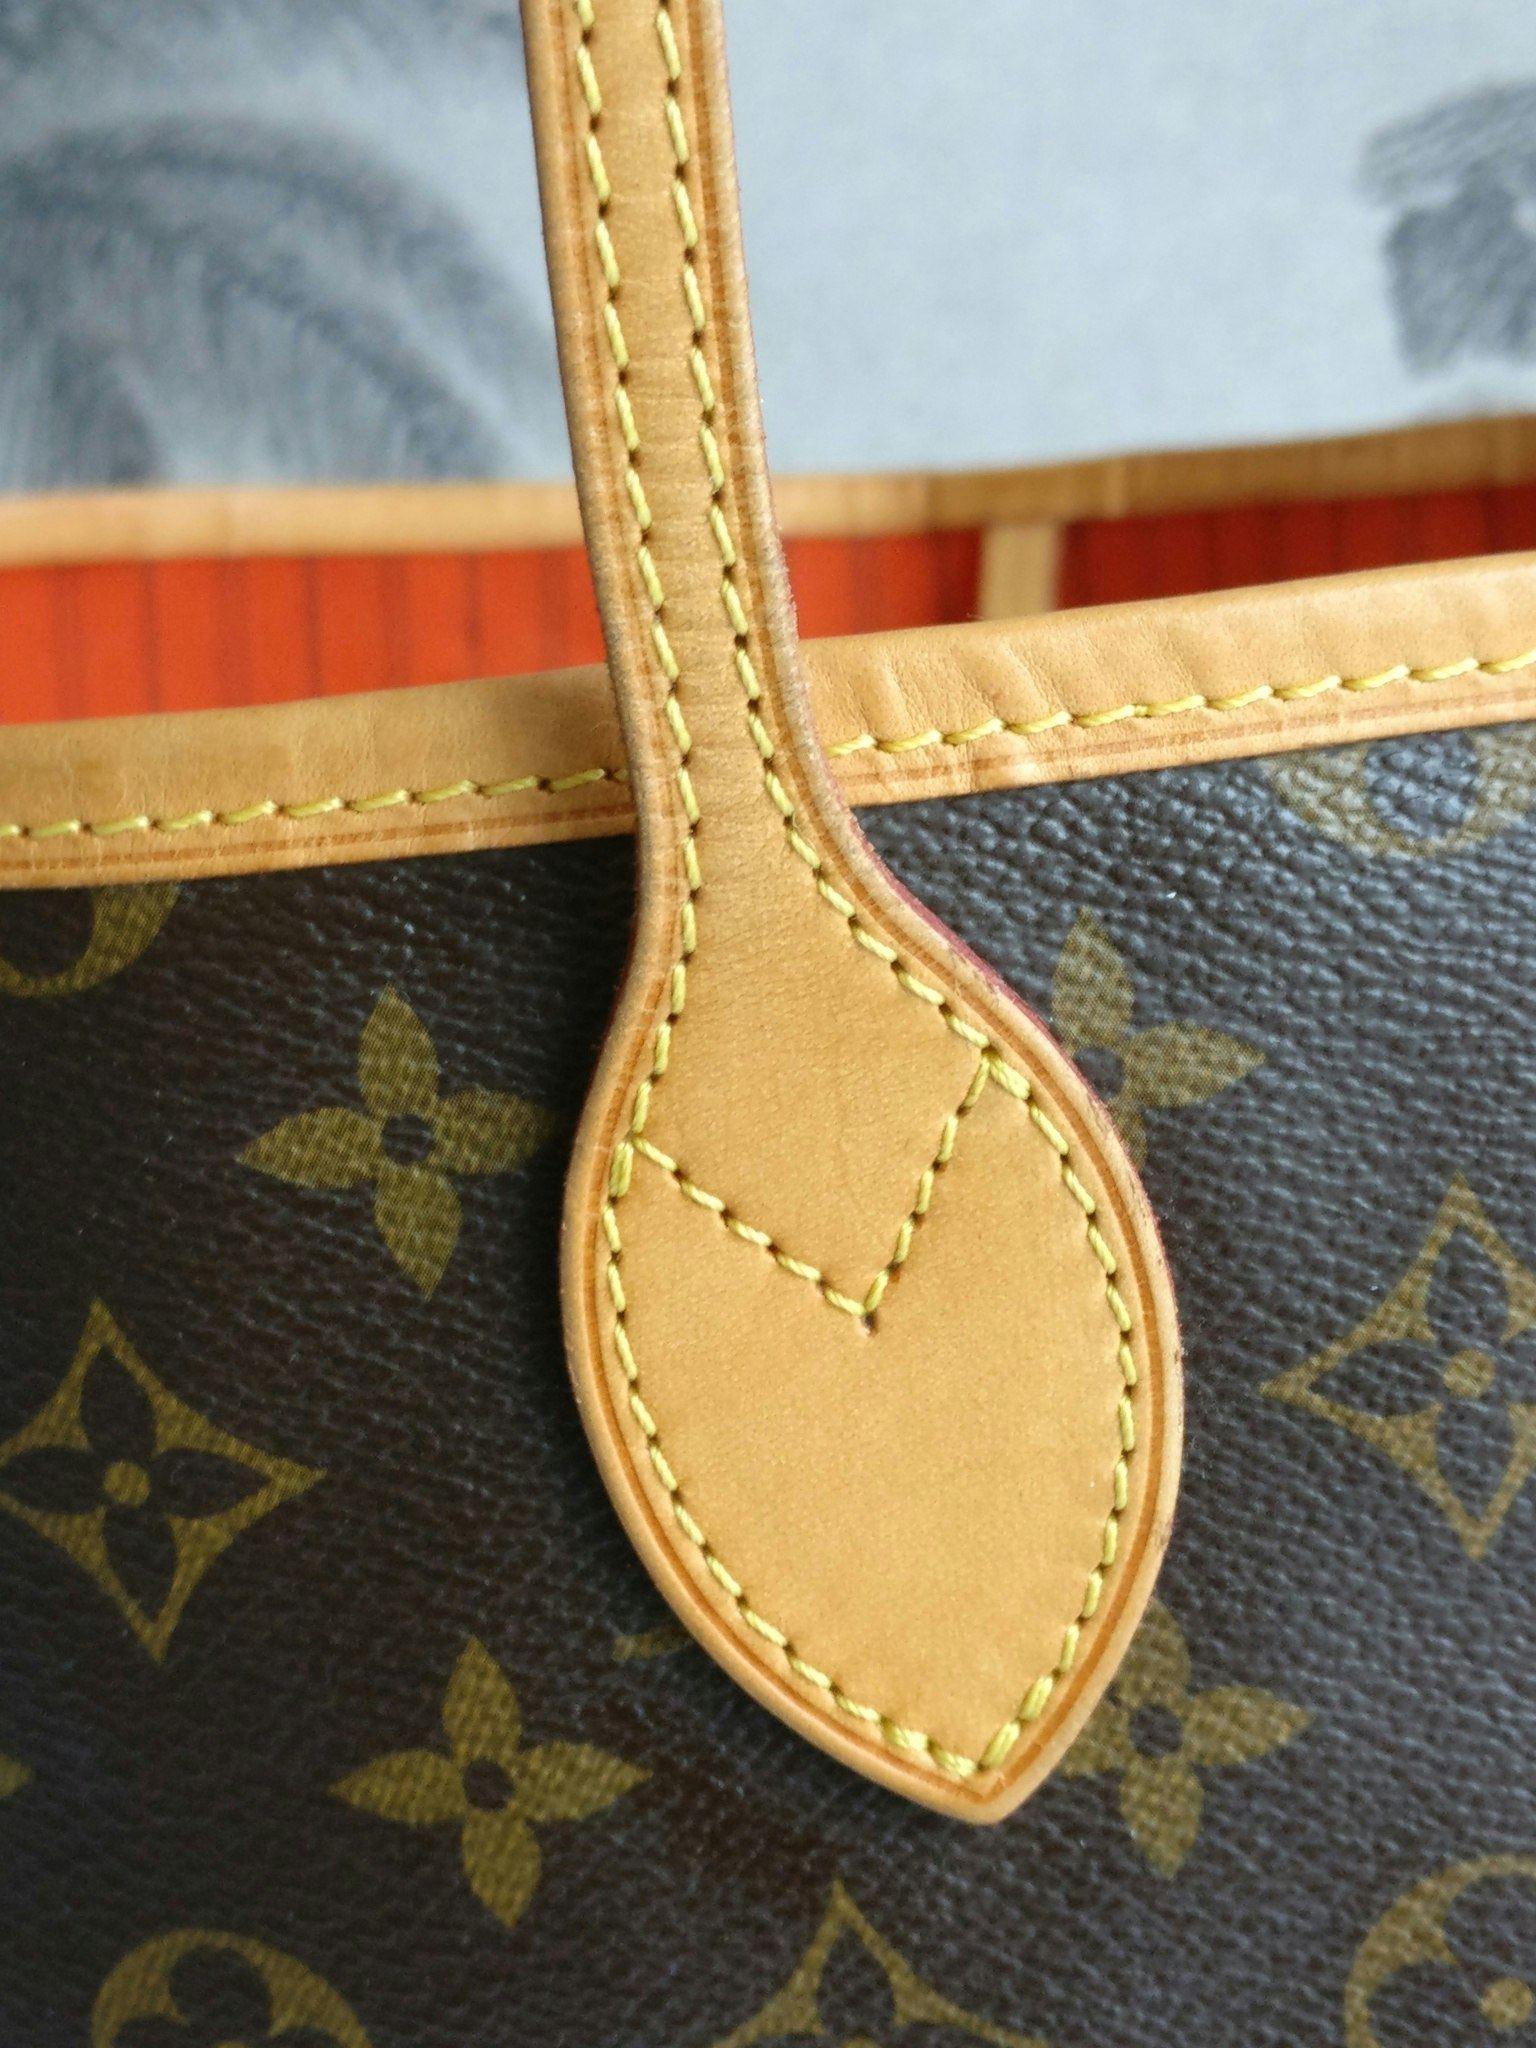 Instant Reveal: Neo Neverfull GM in Piment (Orange) and